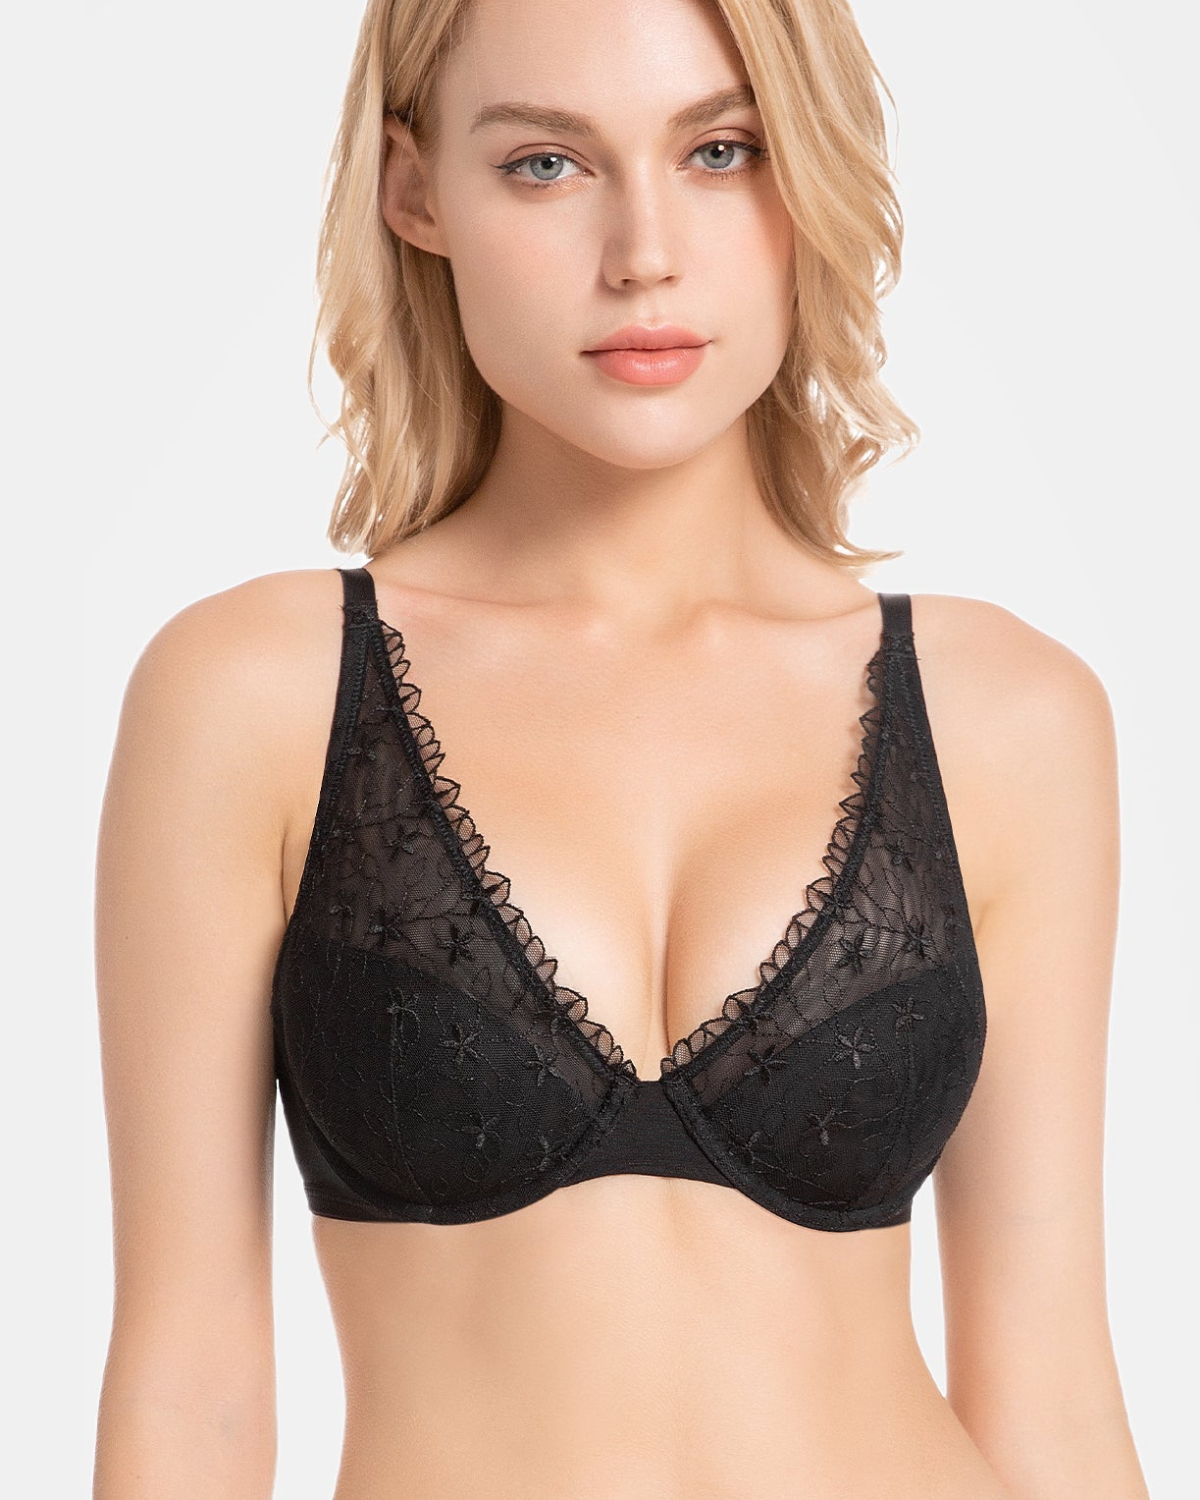 Padded Push up Bralette Plunge Embroidered Underwire